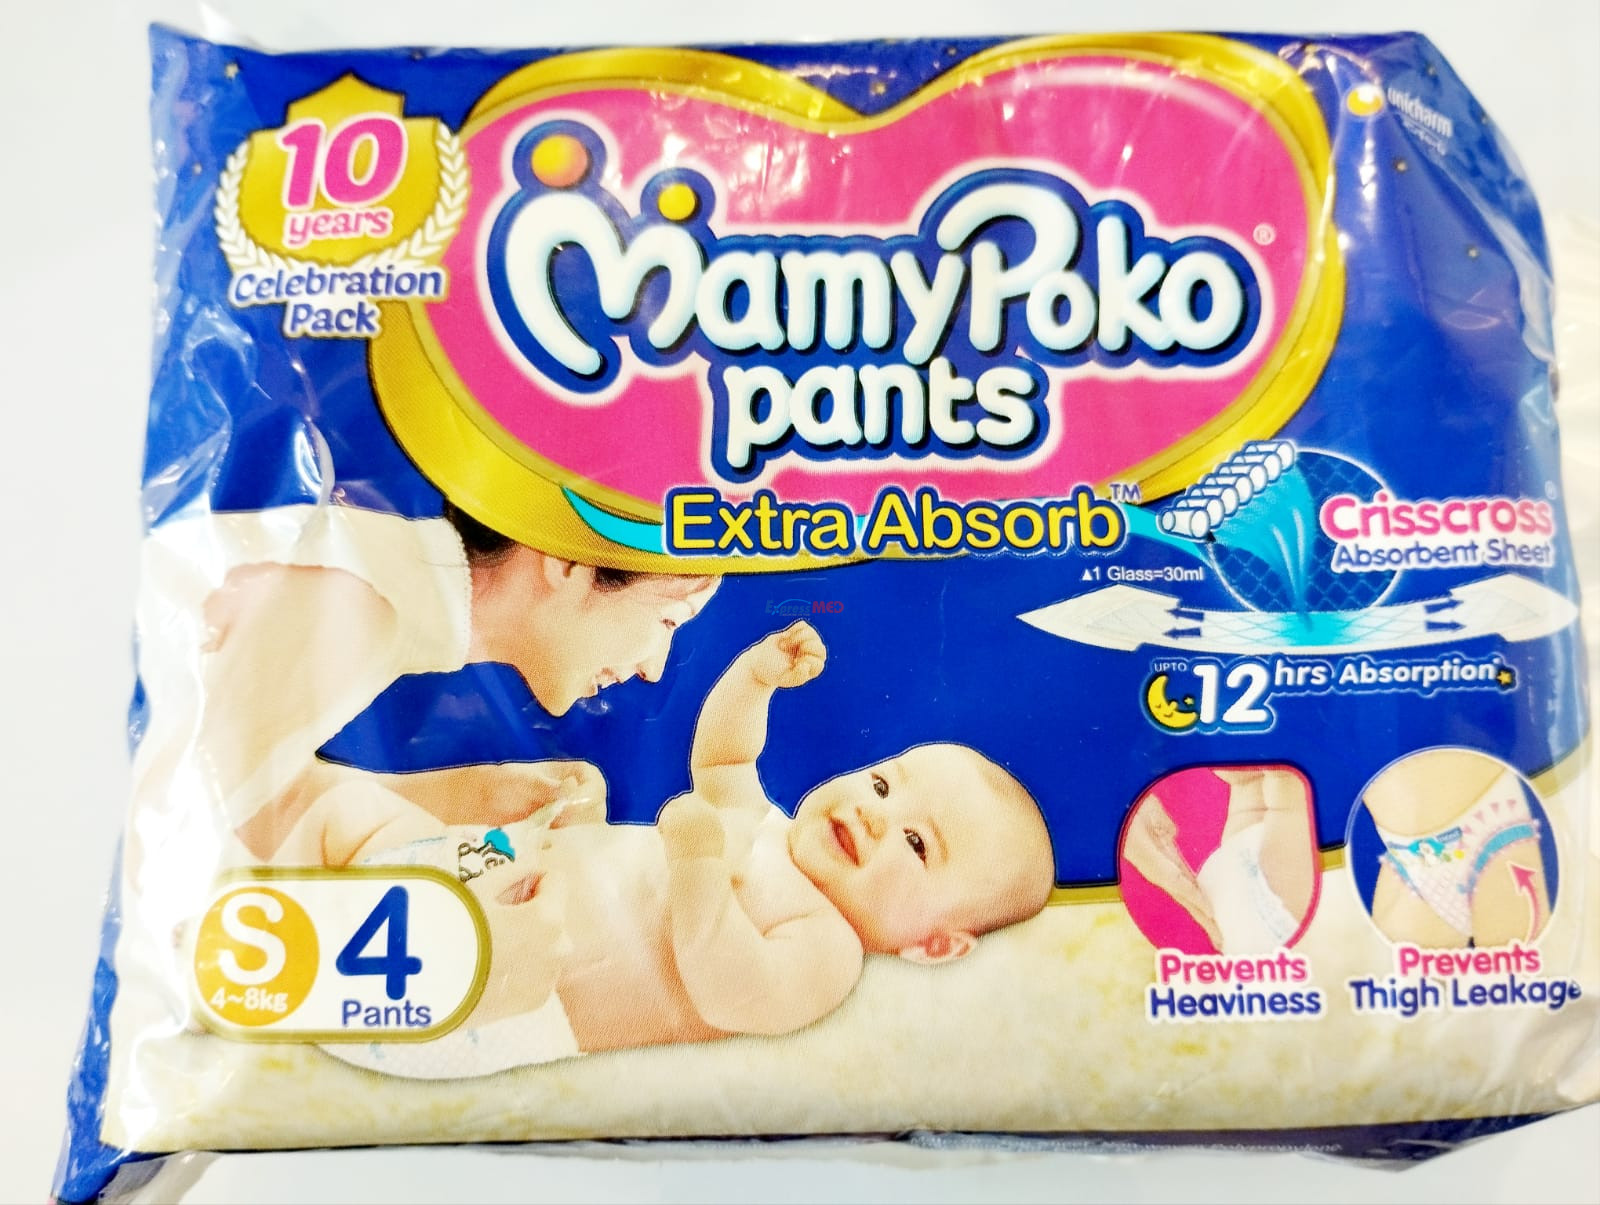 Mamy Poko Pants Standard Small Diapers, Age Group: 4-8 Months at Rs  7.50/piece in Mustafabad